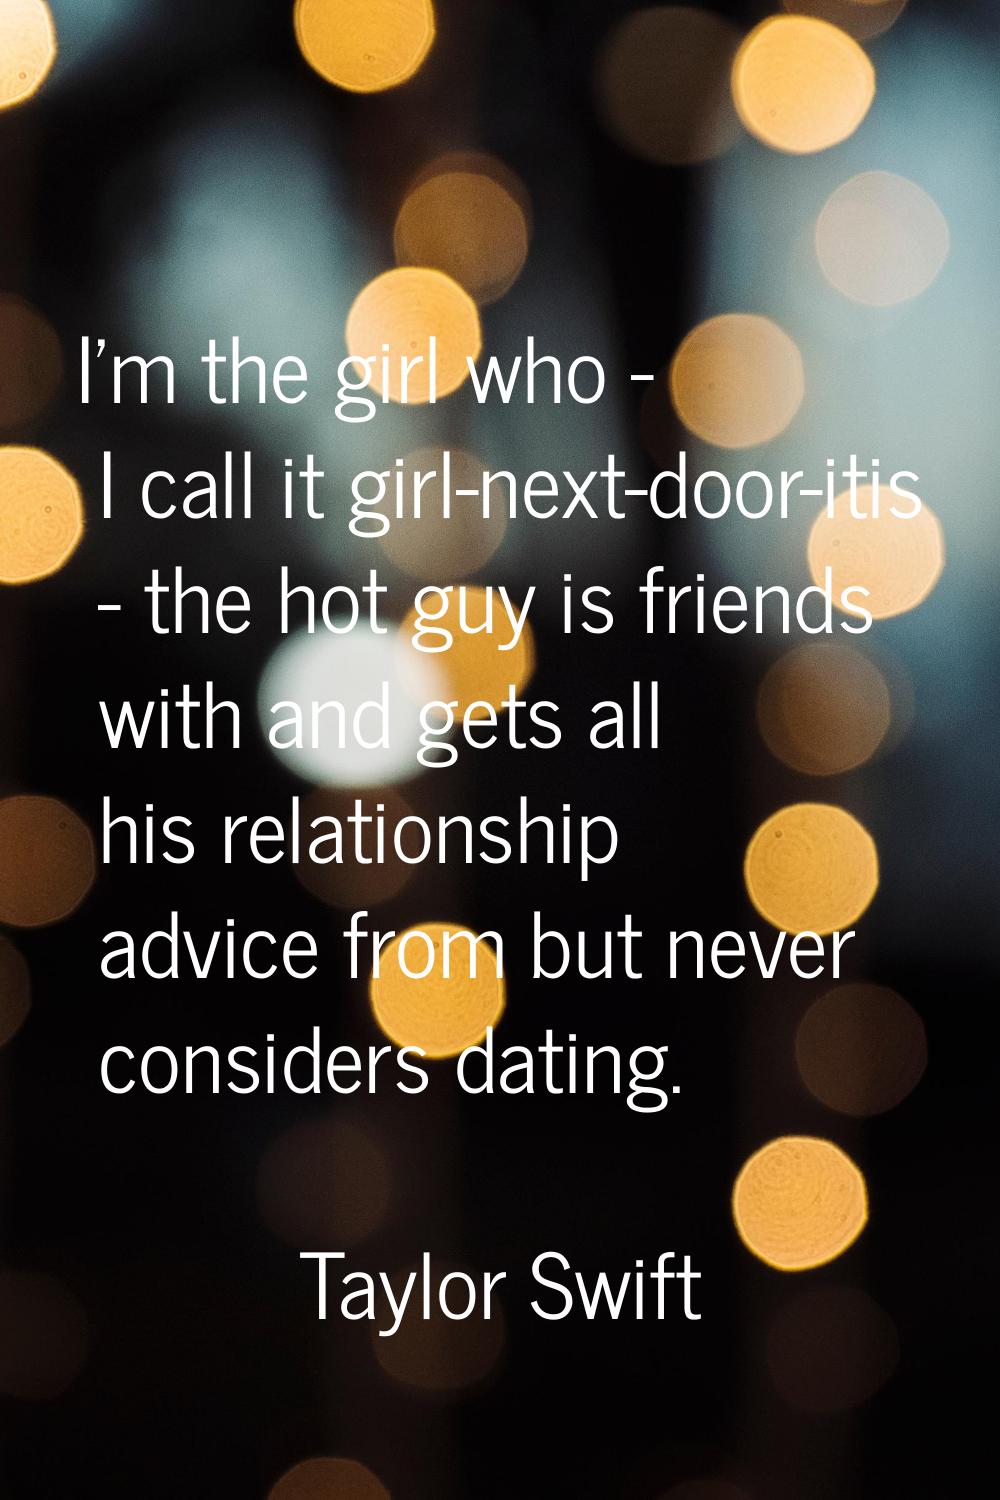 I'm the girl who - I call it girl-next-door-itis - the hot guy is friends with and gets all his rel